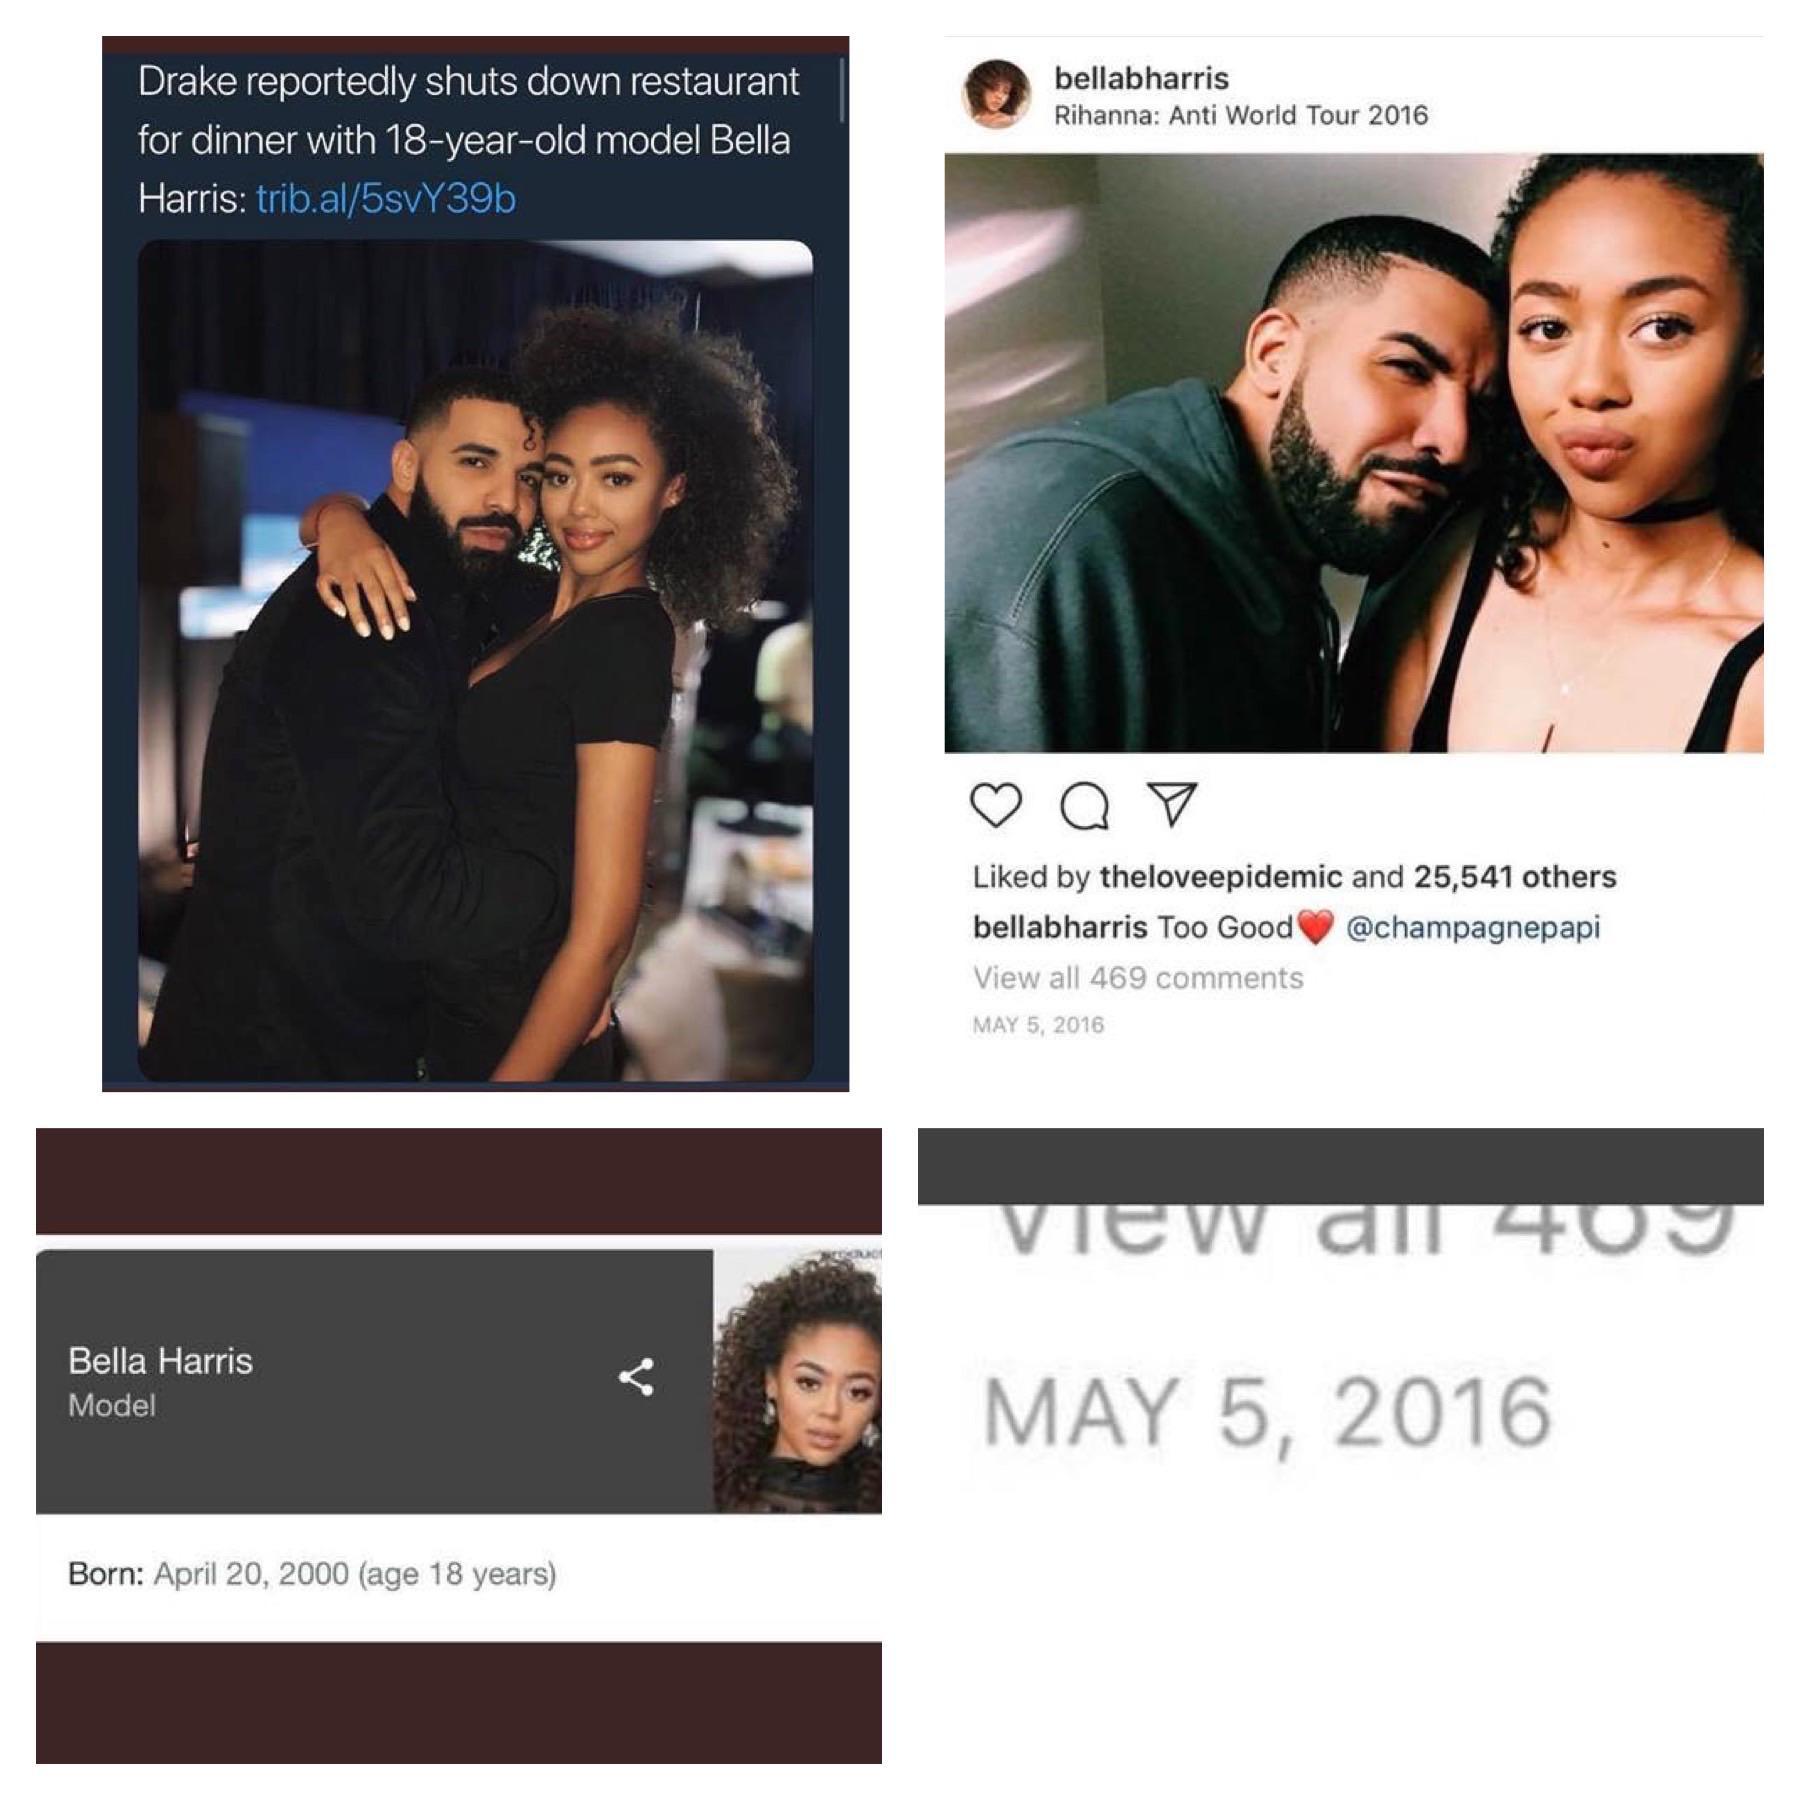 cringe pics - wtf pics - drake millie bobby brown reddit - bellabharris Rihanna Anti World Tour 2016 Drake reportedly shuts down restaurant for dinner with 18yearold model Bella Harris trib.al5svY39b d by theloveepidemi and 25,541 others bellabharris Too 